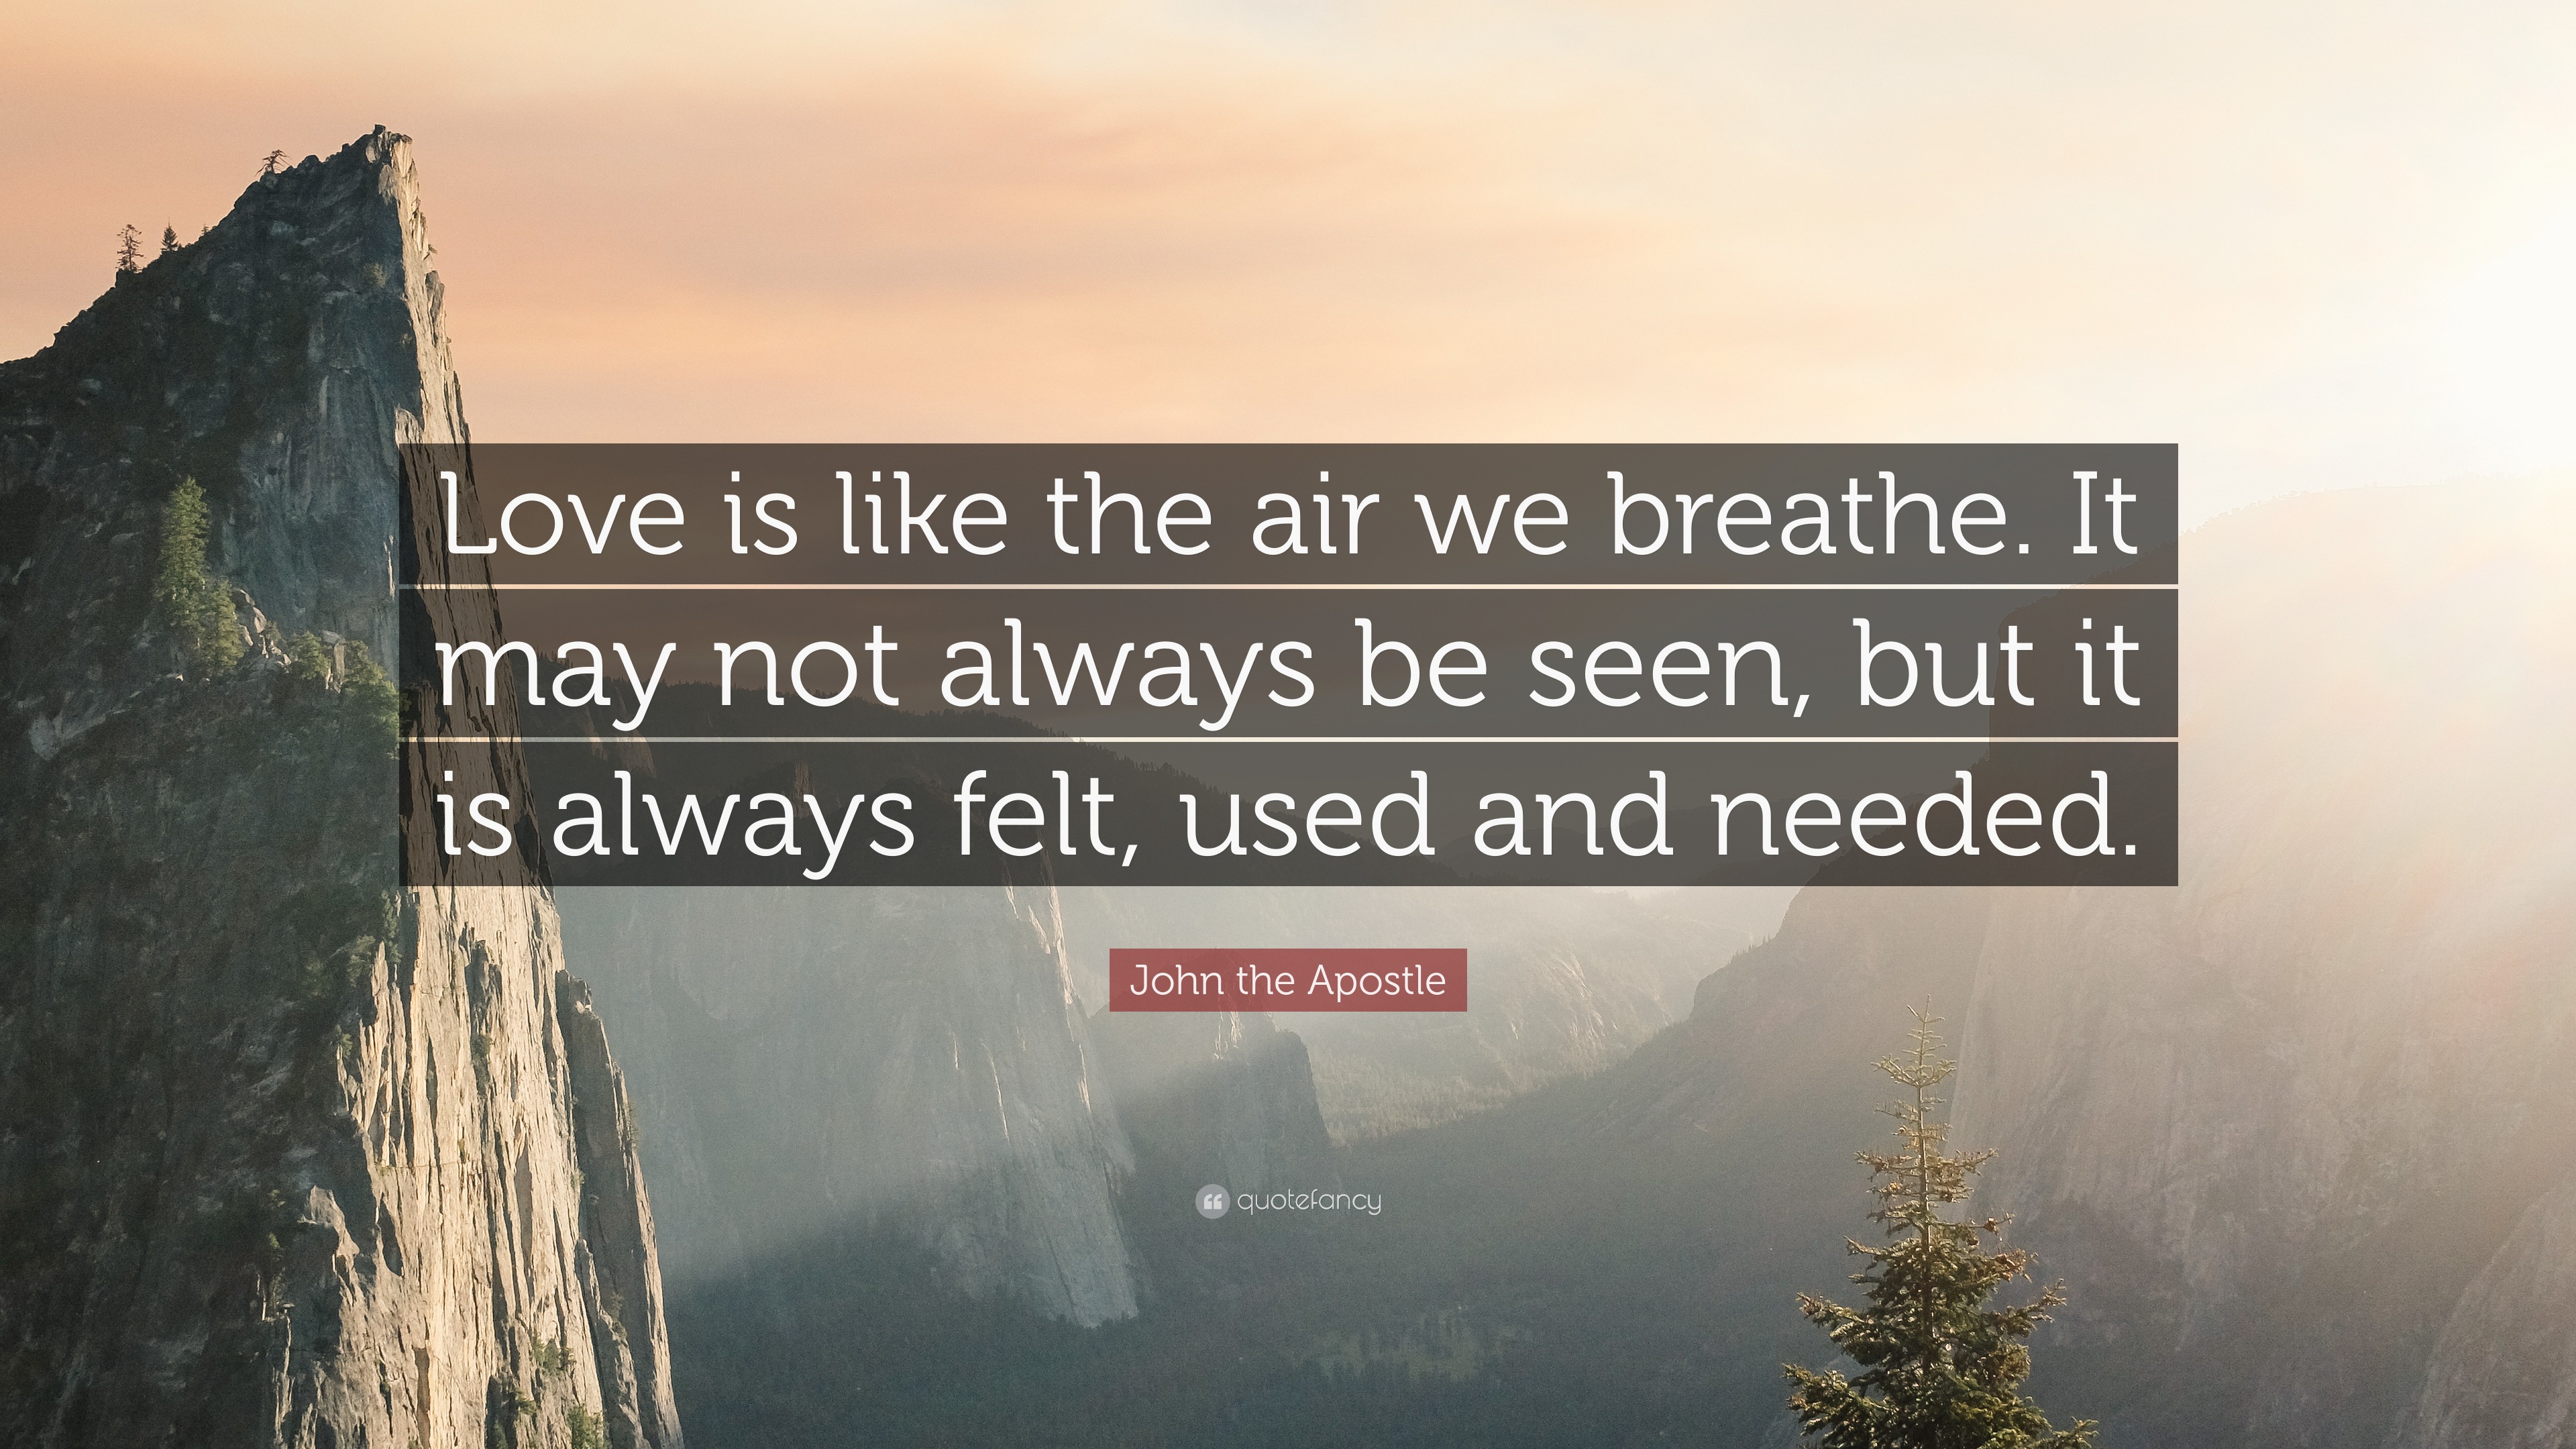 John the Apostle Quote Love is like the air we breathe It may